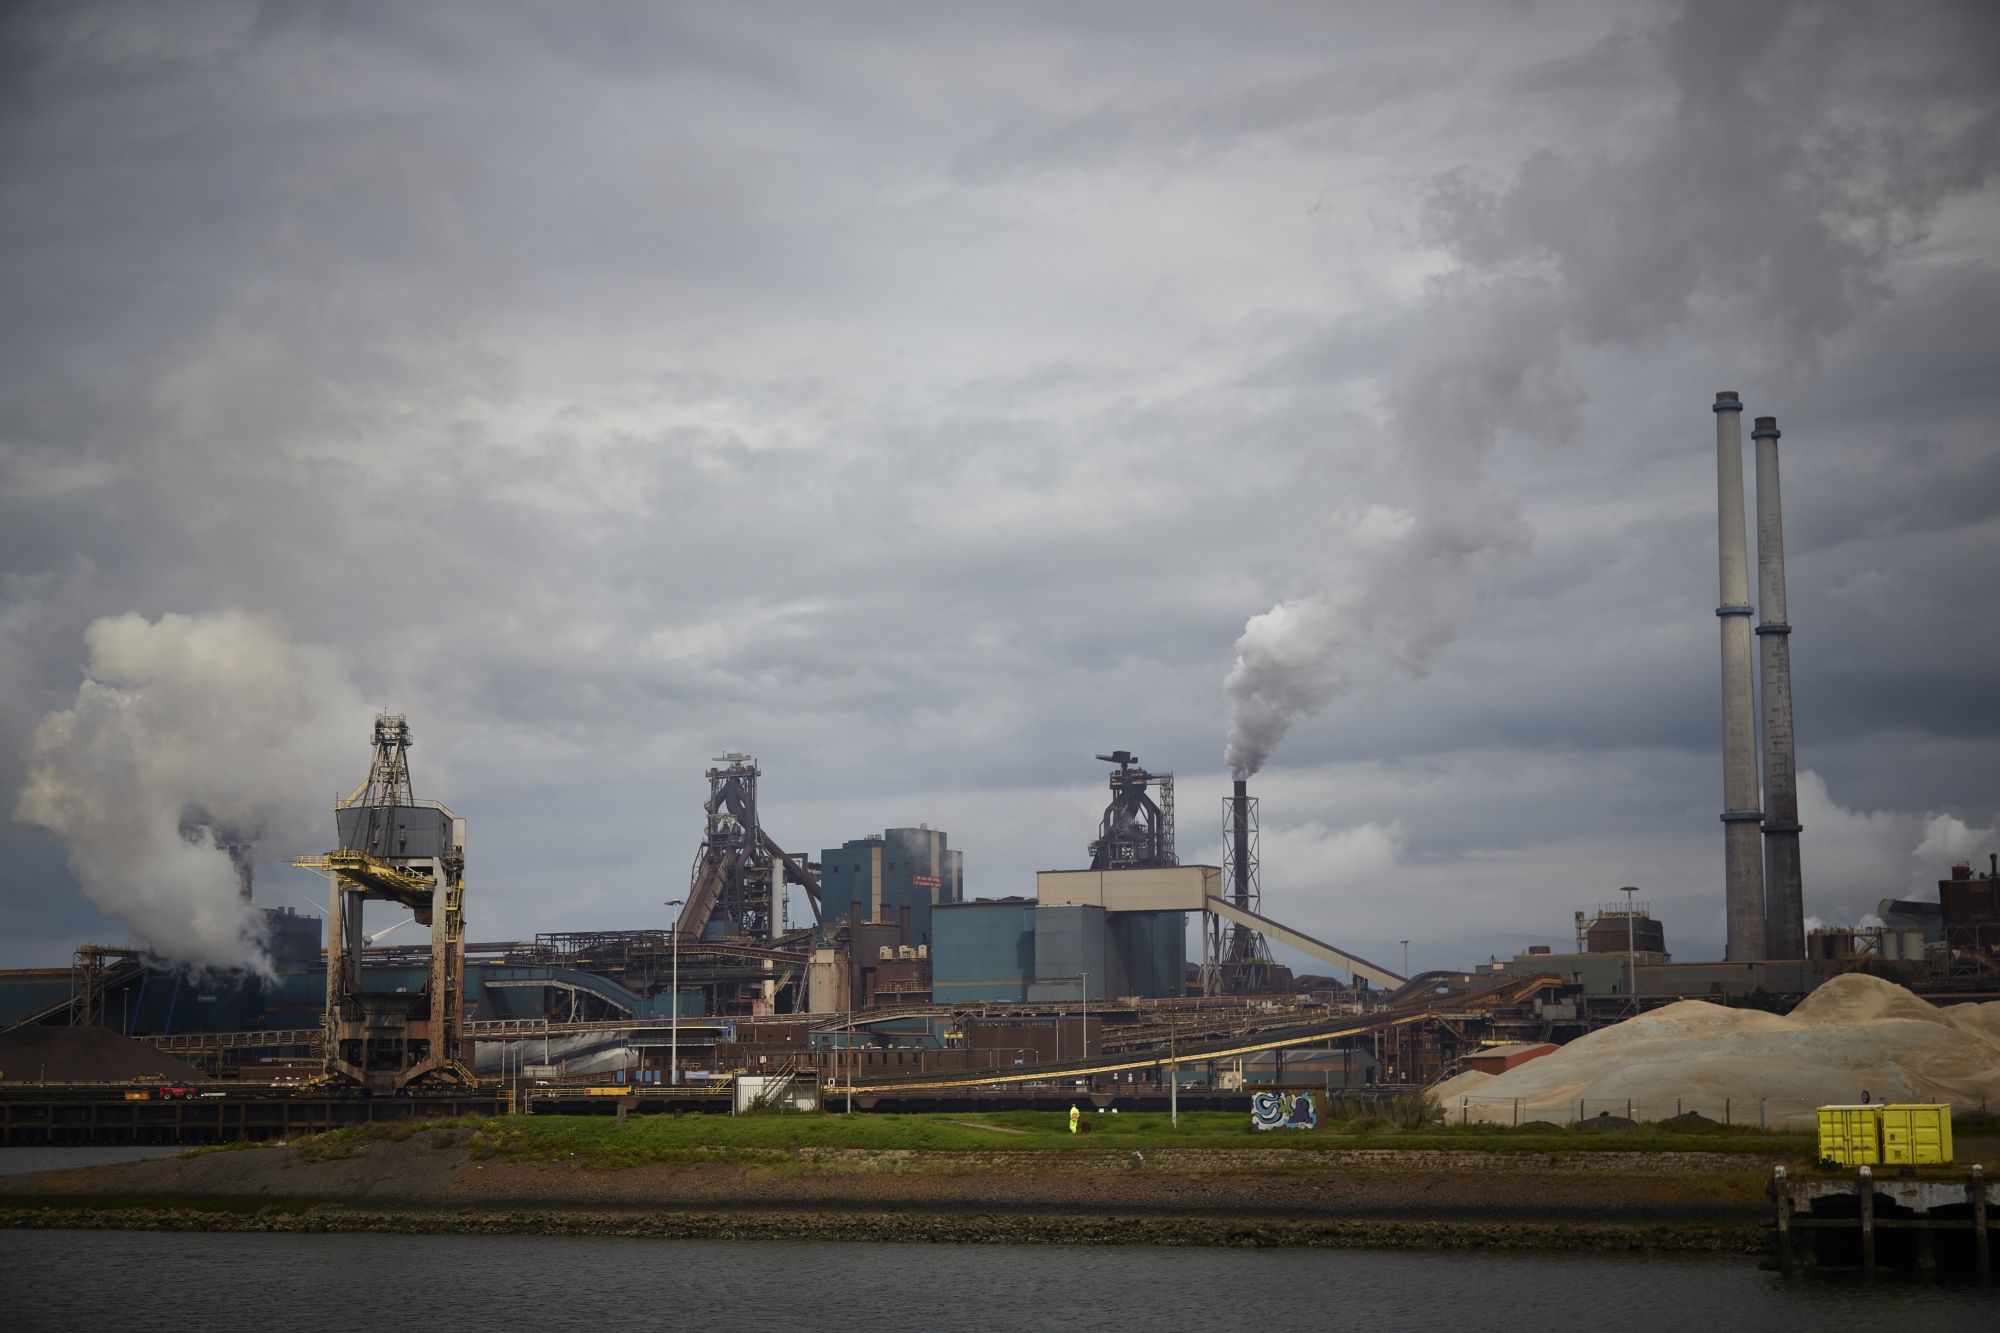 Emissions from Tata Steel's Dutch plant reduce life expectancy, research  shows